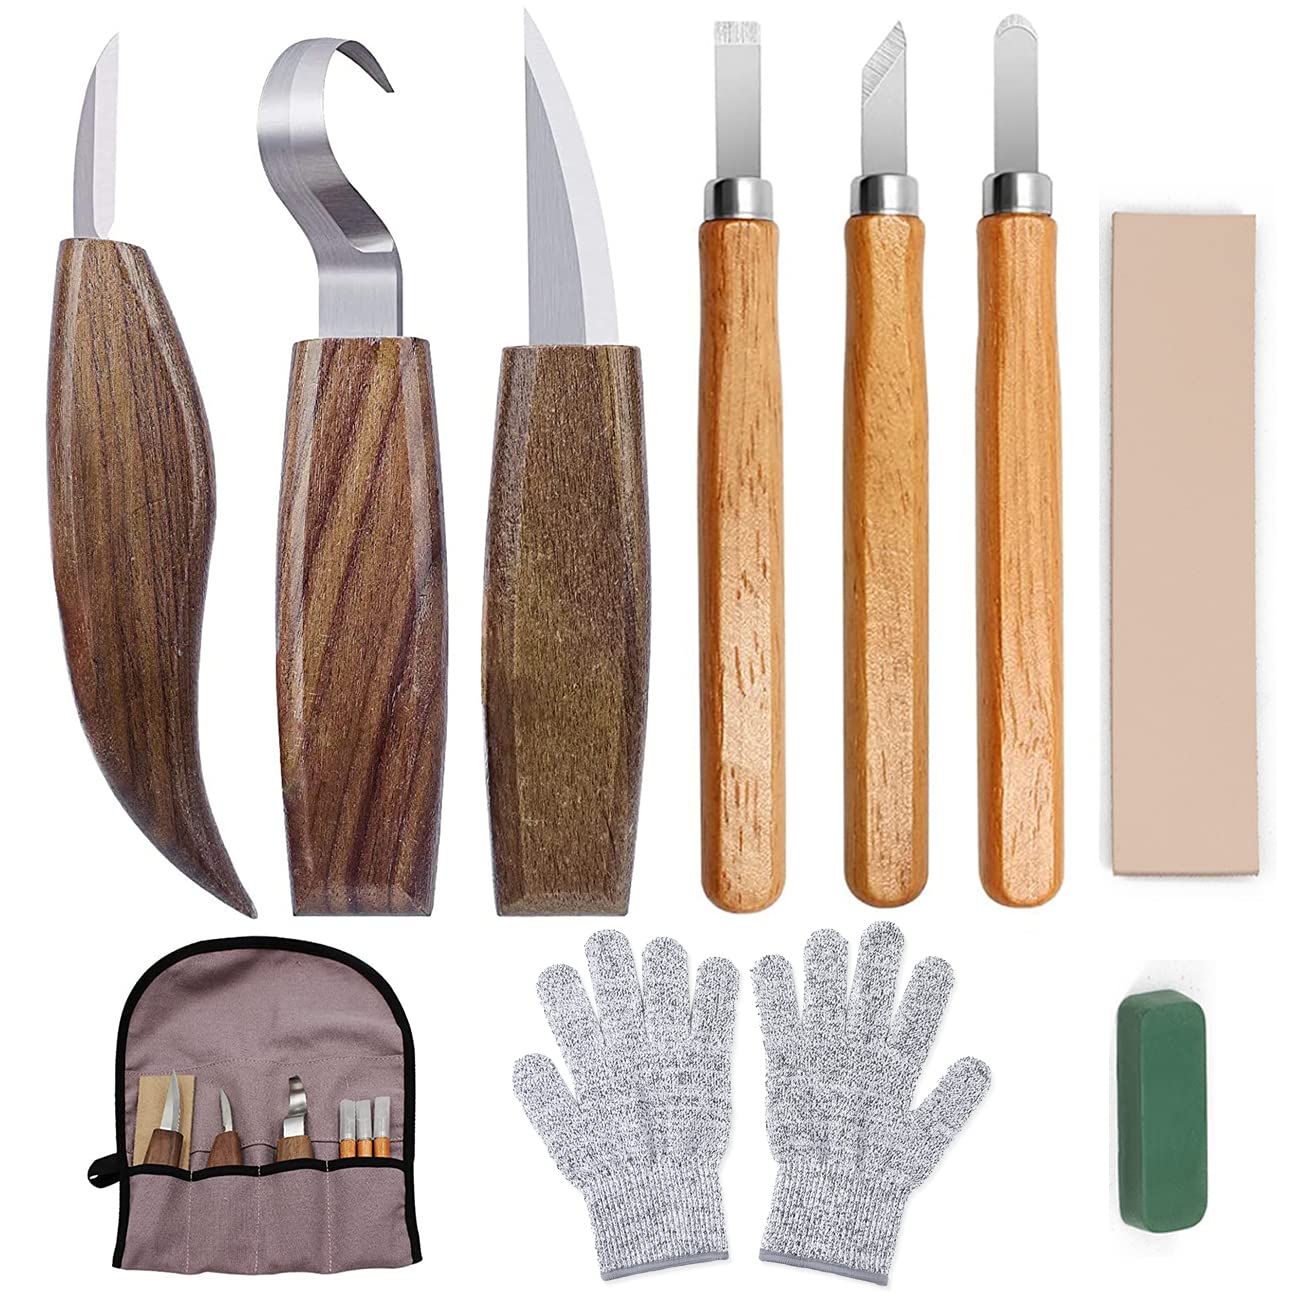 Wood Carving Tools, 7 In 1 Wood Carving Knife Set With Carving Hook Knife,  Wood Whittling Knife, Chip Carving Knife, Gloves, Carving Knife Sharpener F